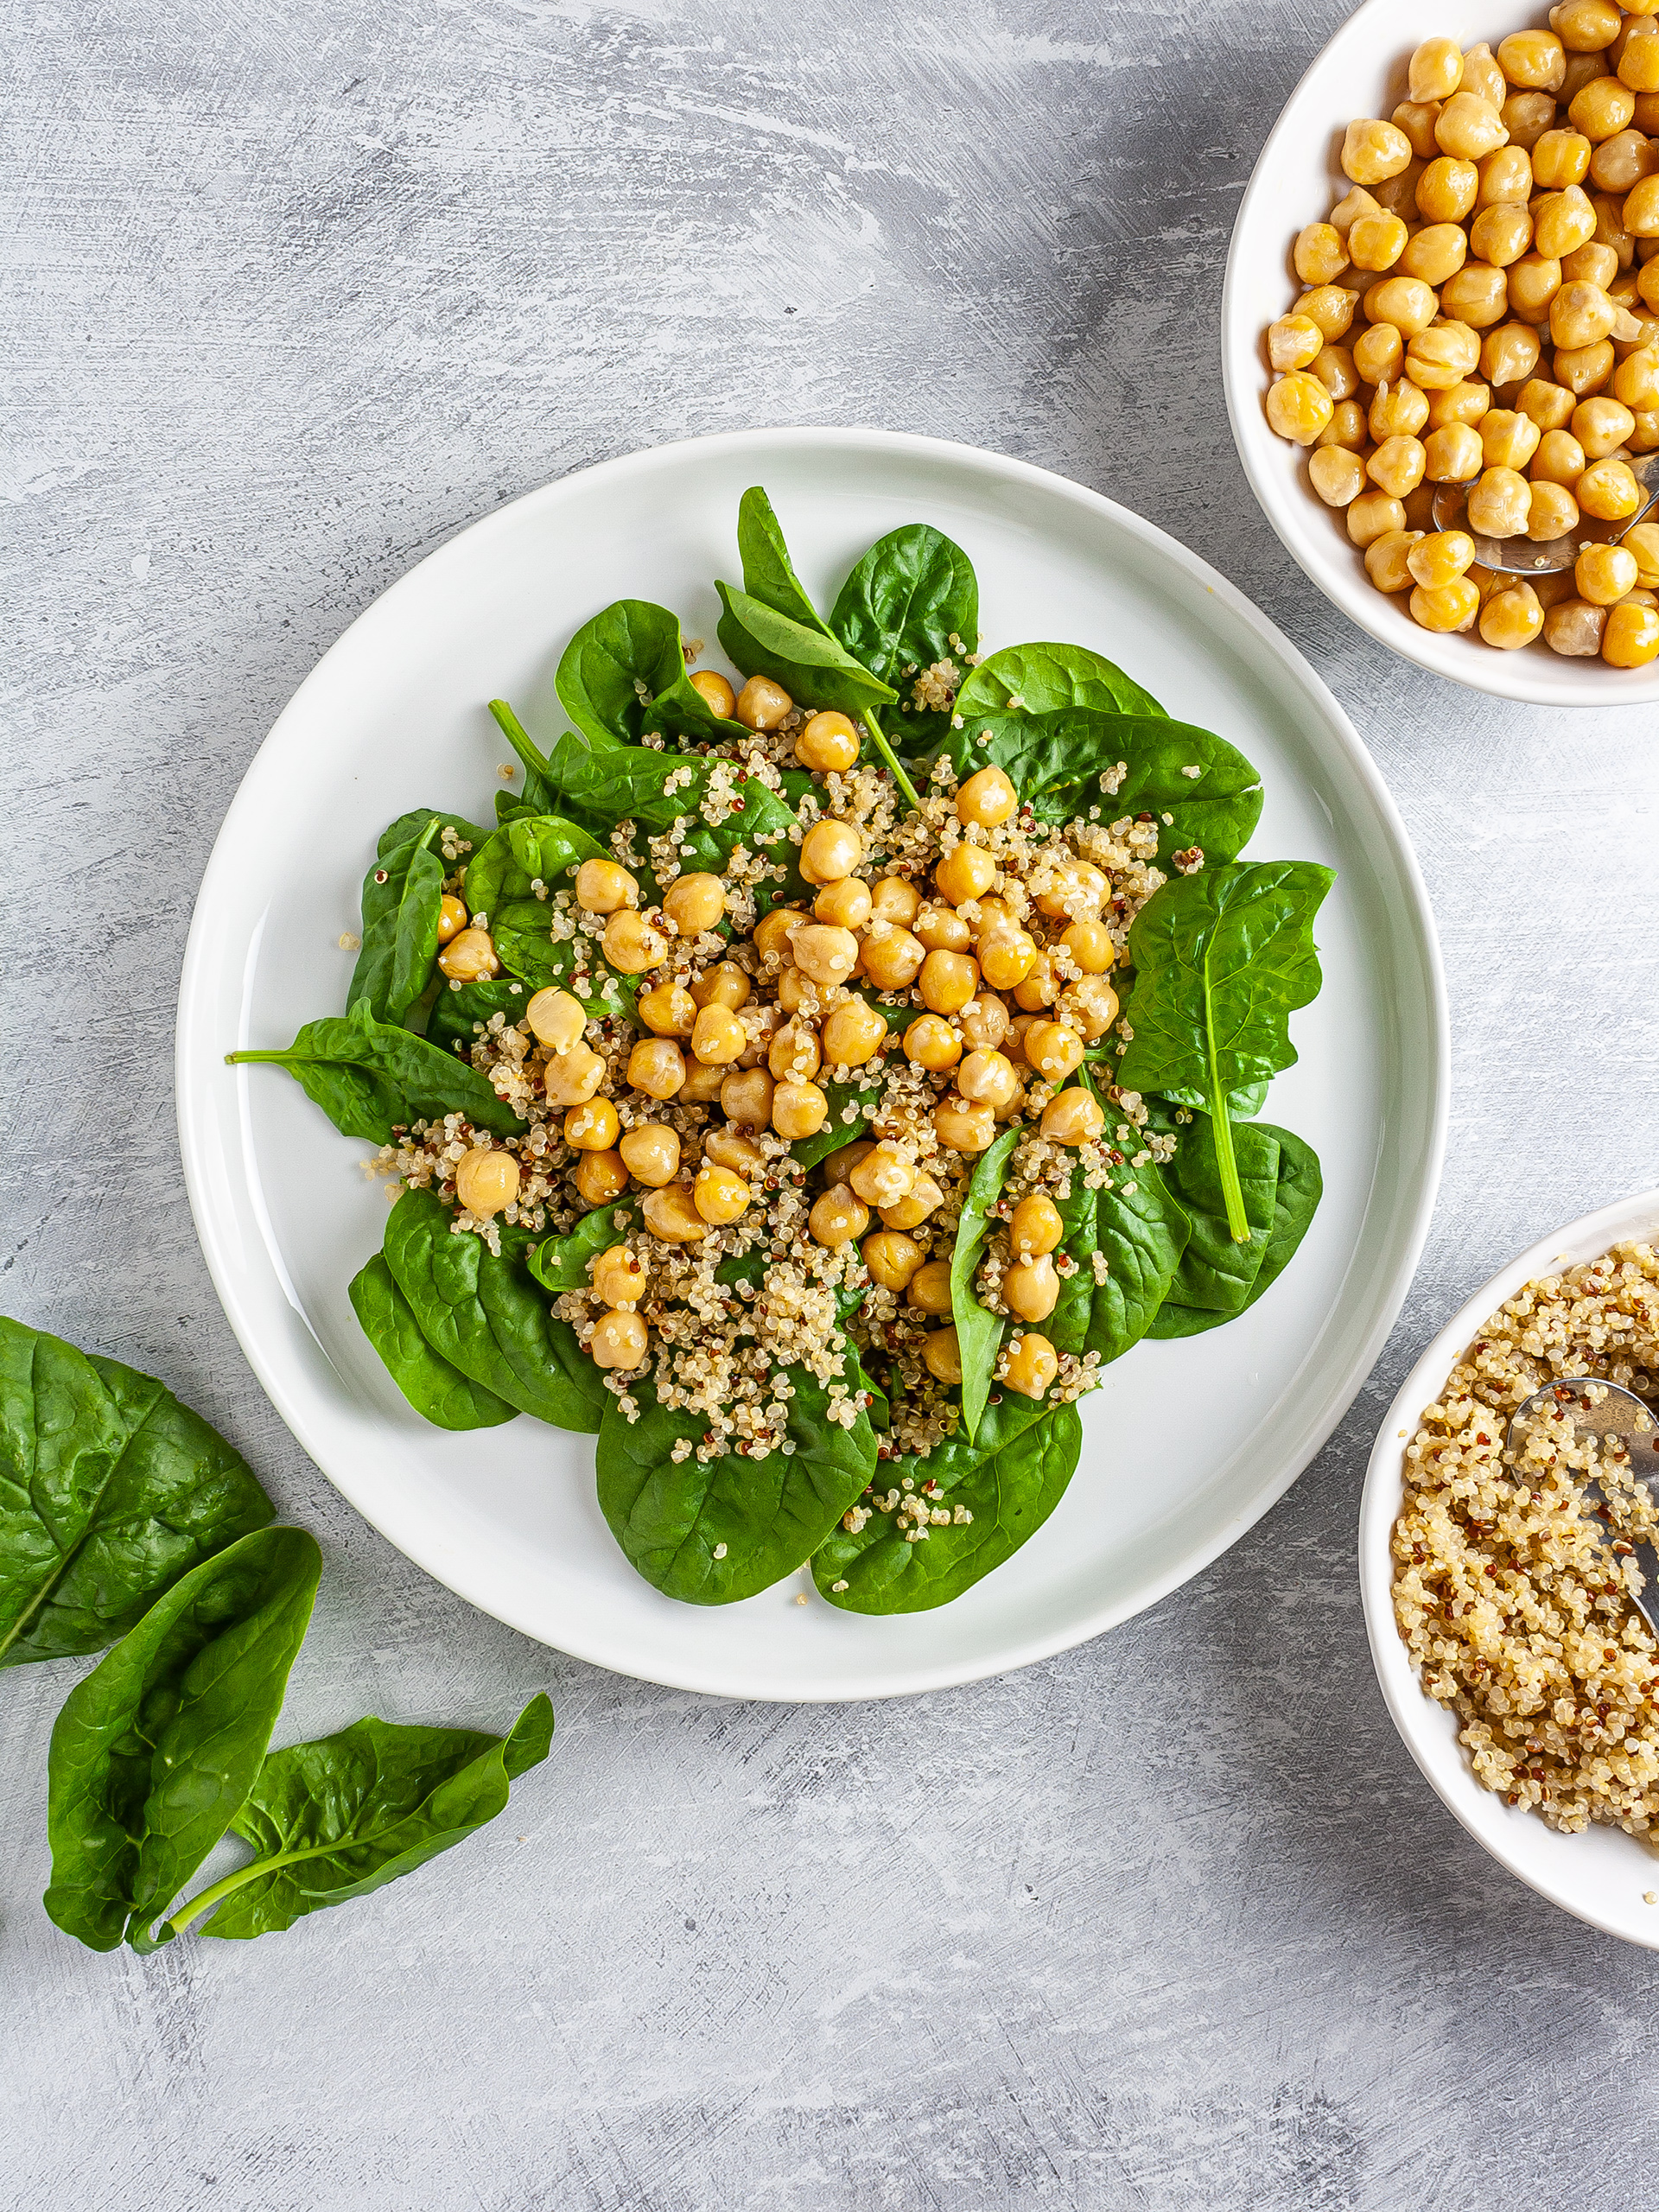 Spinach, chickpeas, and quinoa salad